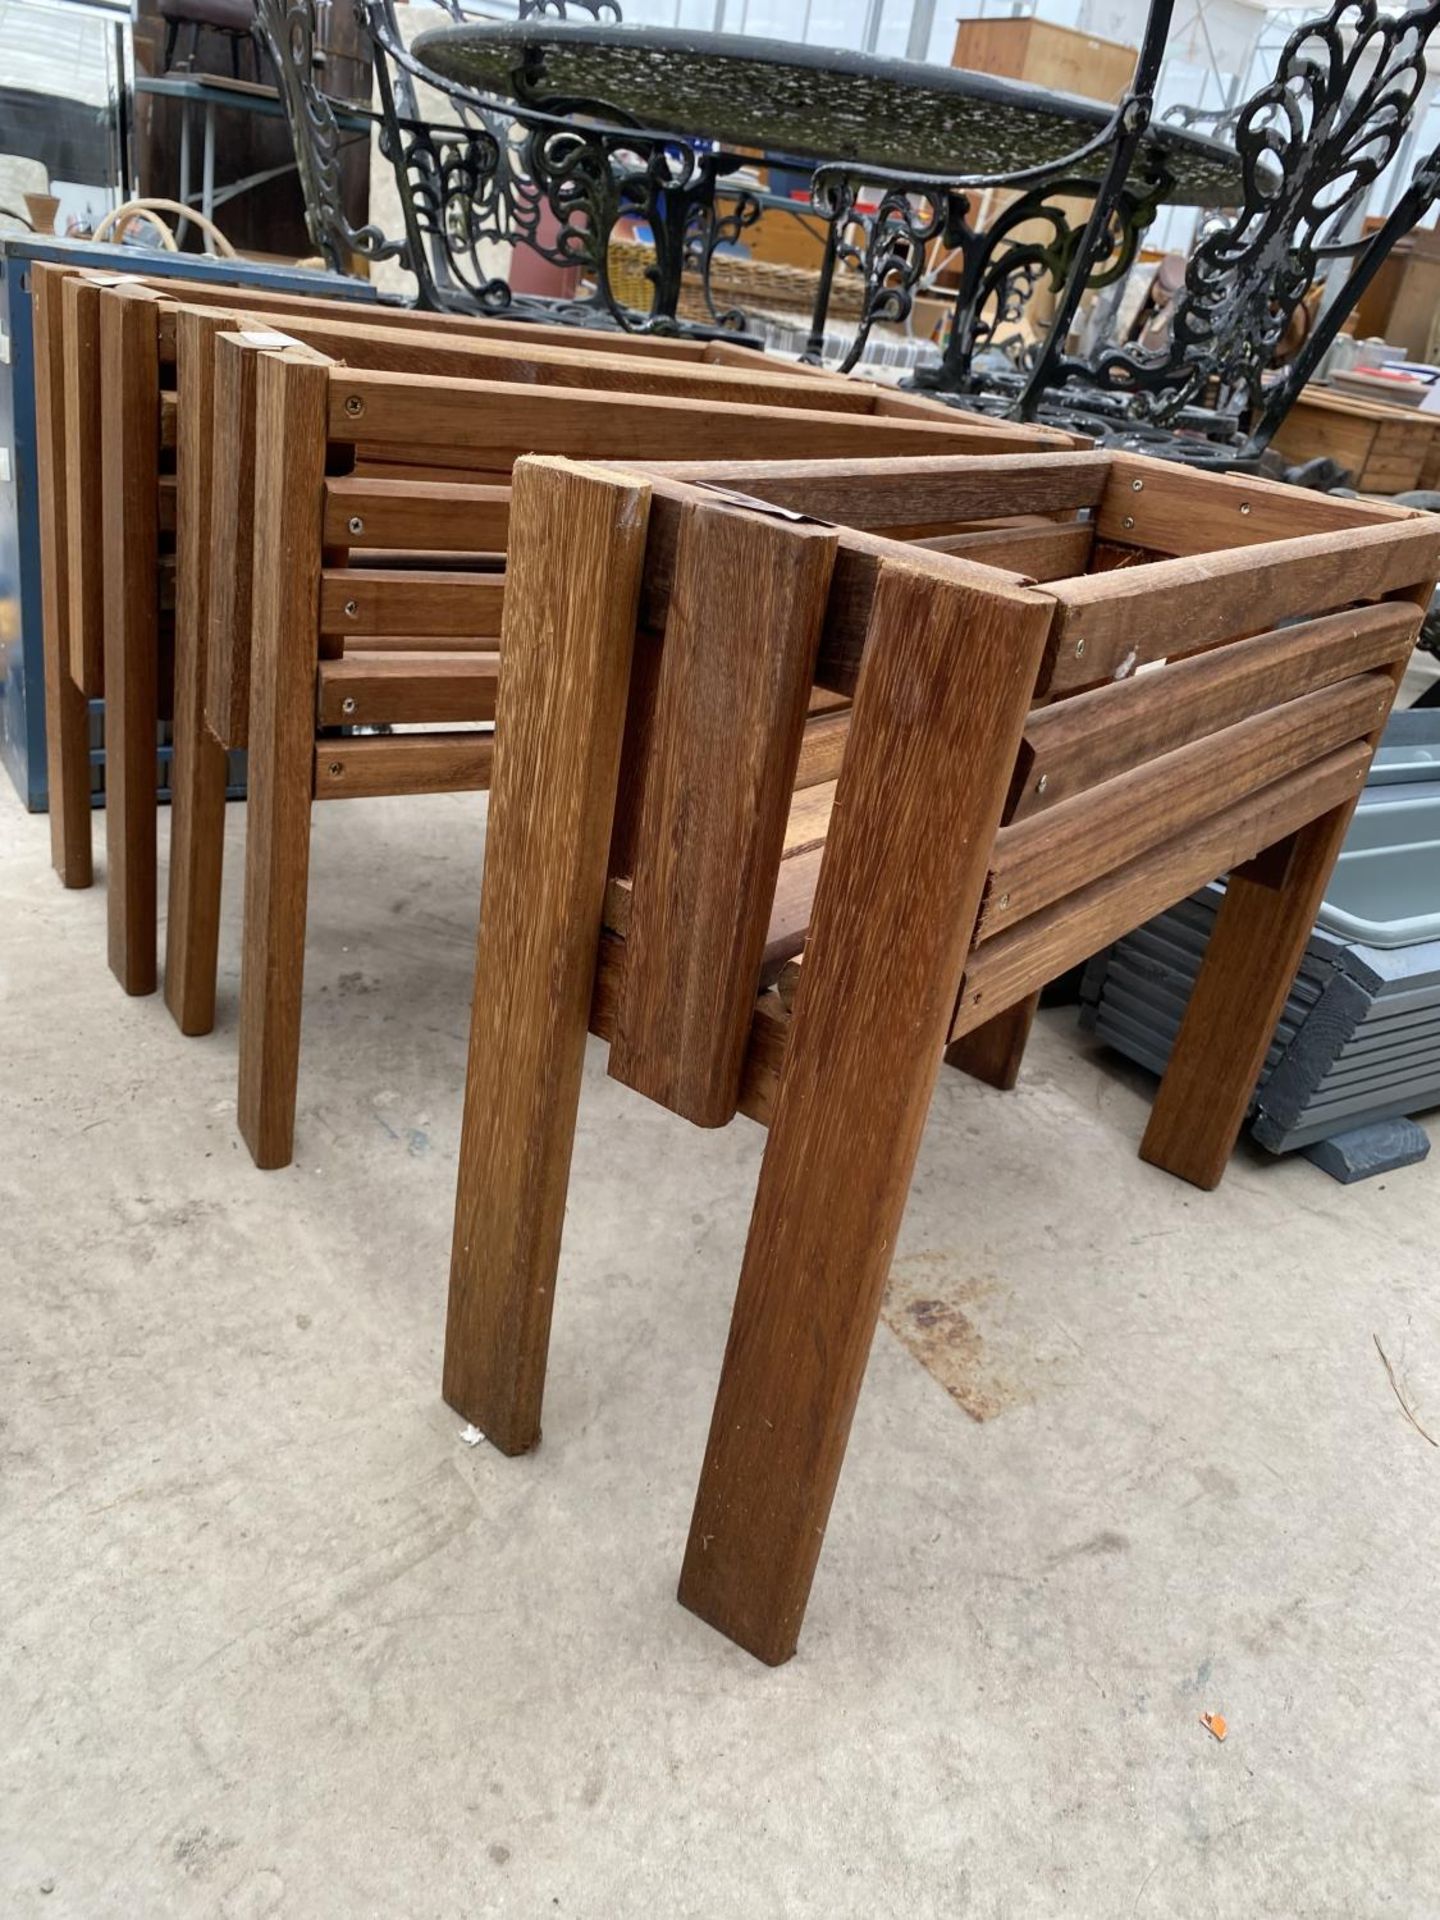 A SET OF THREE WOODEN TROUGH PLANTER HOLDERS - Image 2 of 2